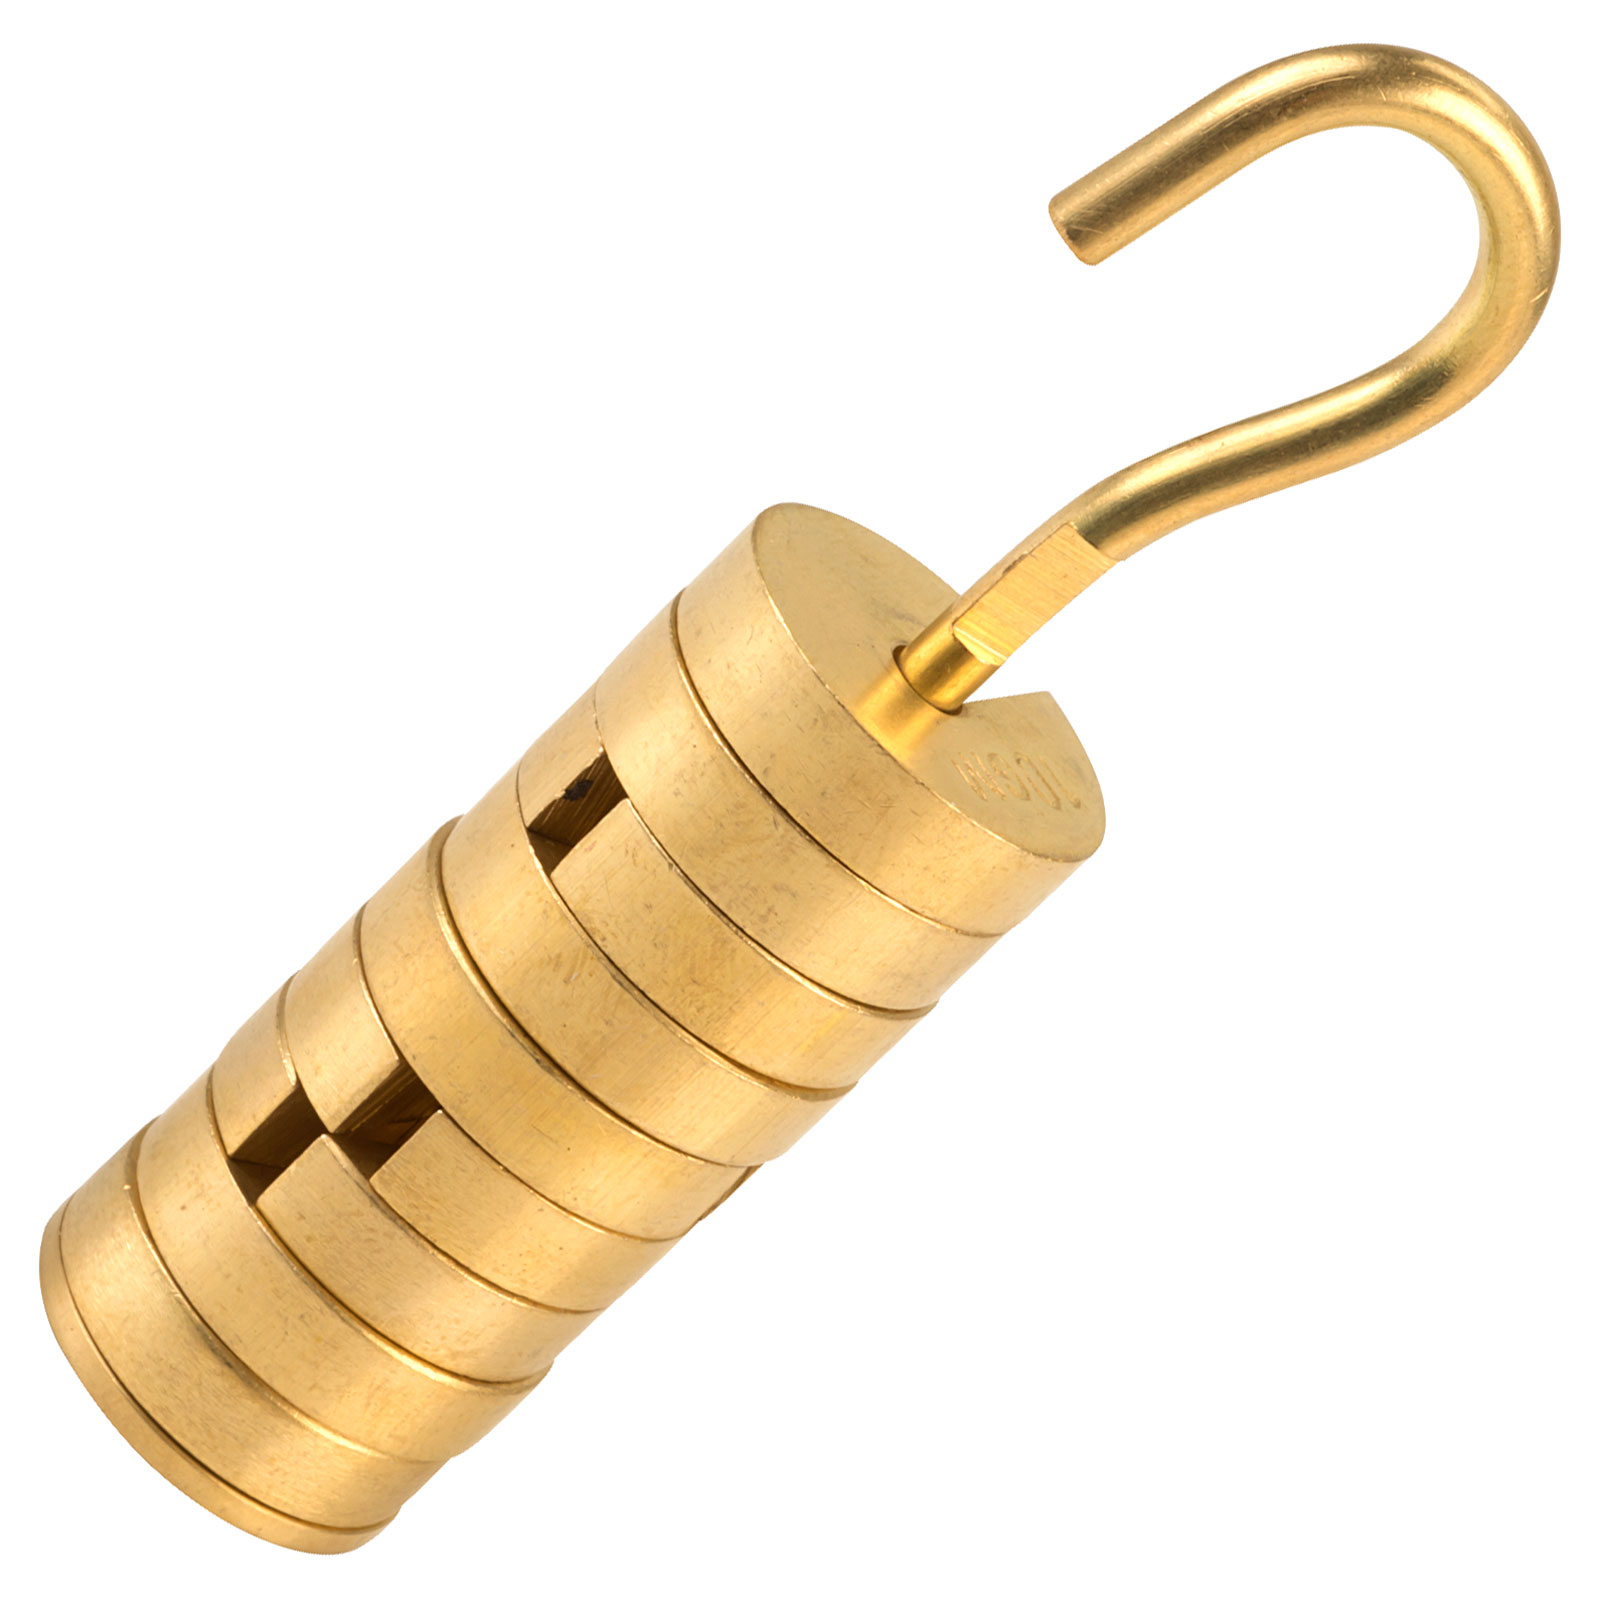 Slotted Mass Set with Hanger, 100g Each - 1000g Total - Brass